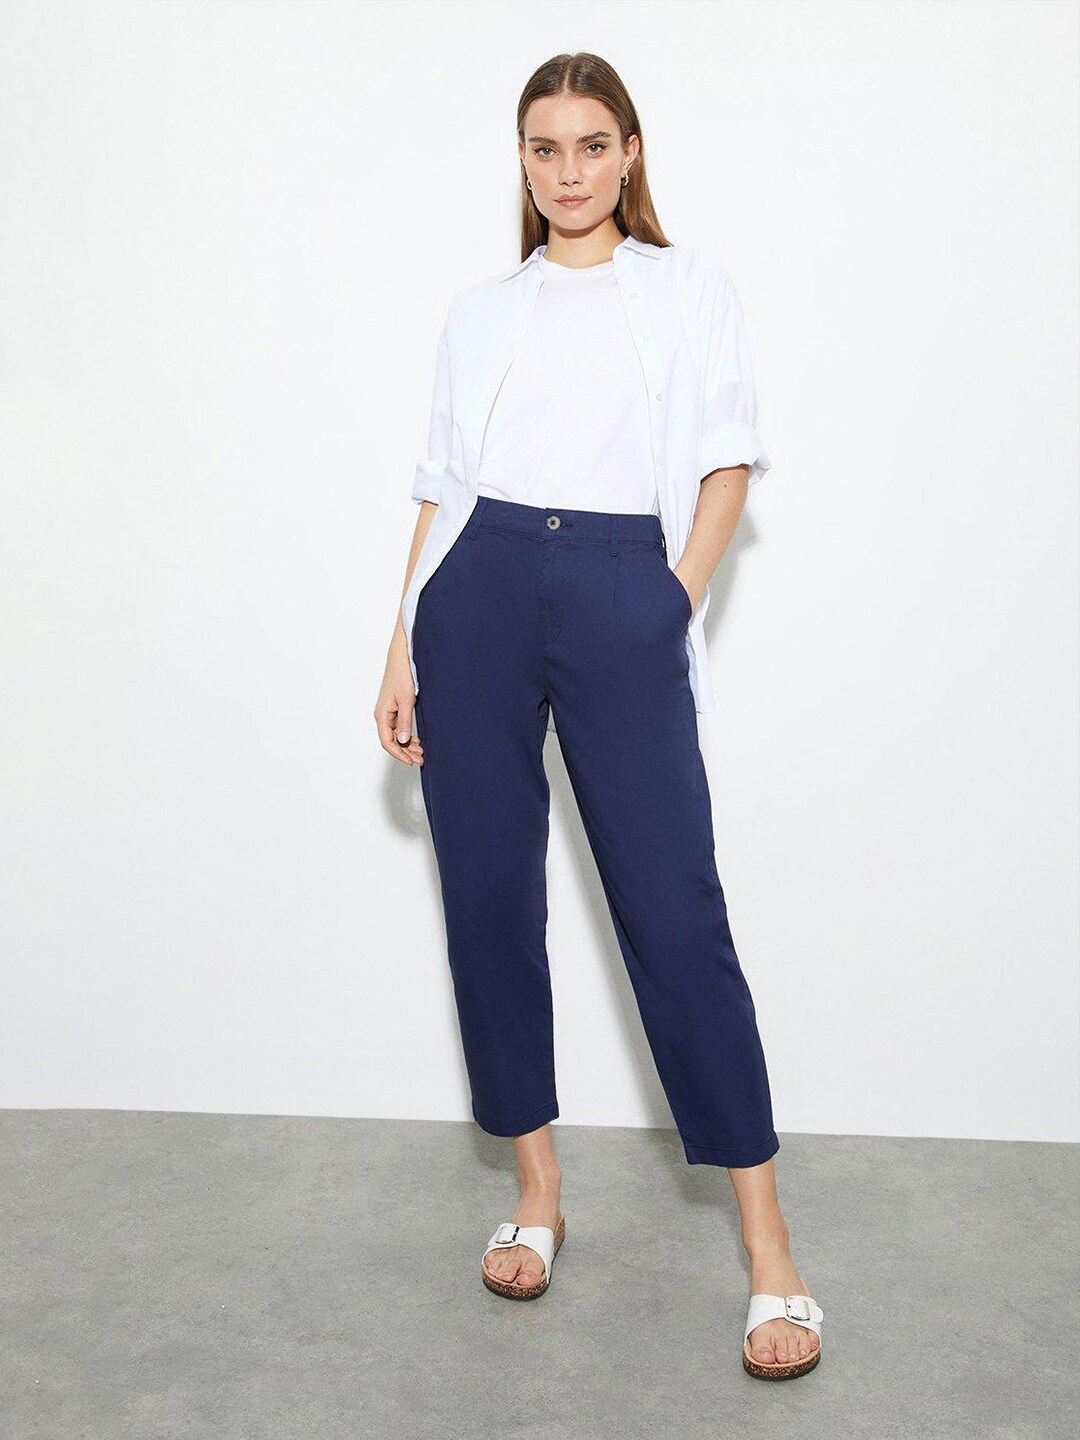 DOROTHY PERKINS Women Trousers Price in India